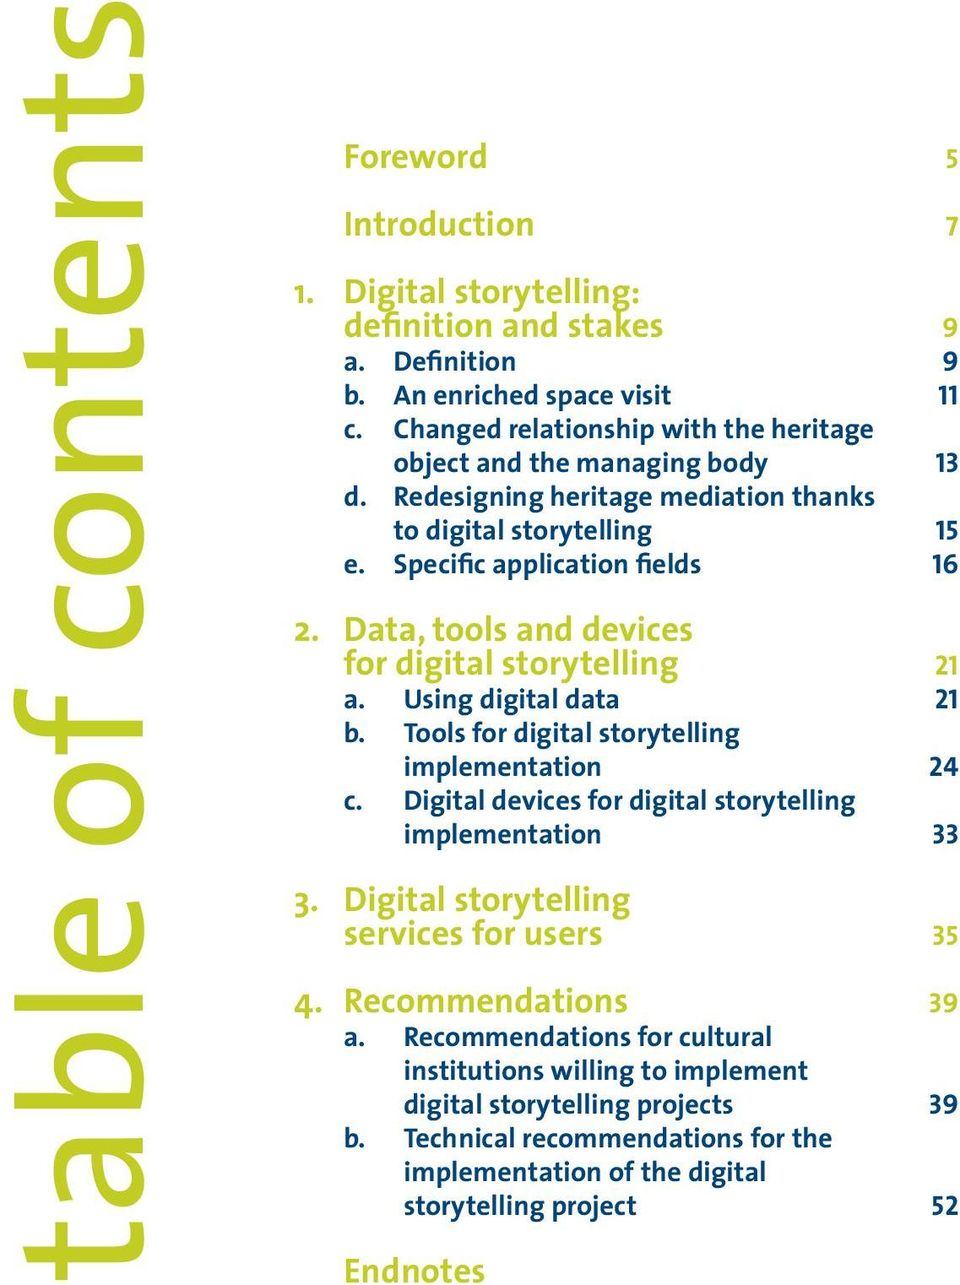 Data, tools and devices for digital storytelling 21 a. Using digital data 21 b. Tools for digital storytelling implementation 24 c. Digital devices for digital storytelling implementation 33 3.